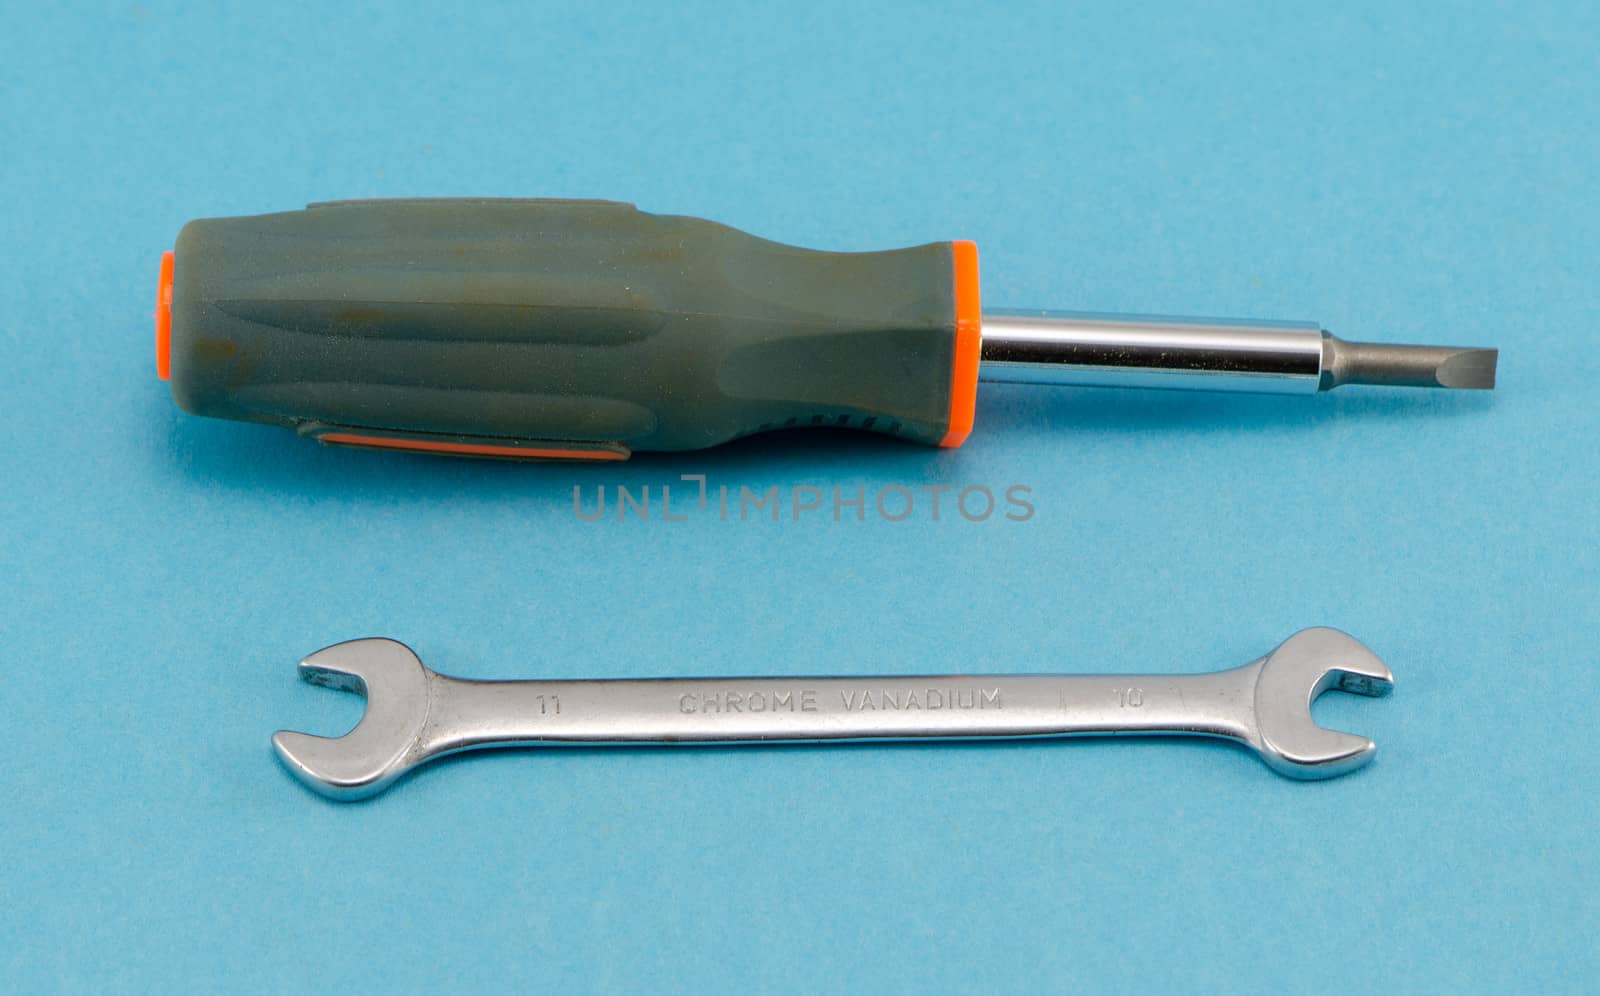 screwdriver turn-screw spanner tommy wrench construction work hand tools on blue background.